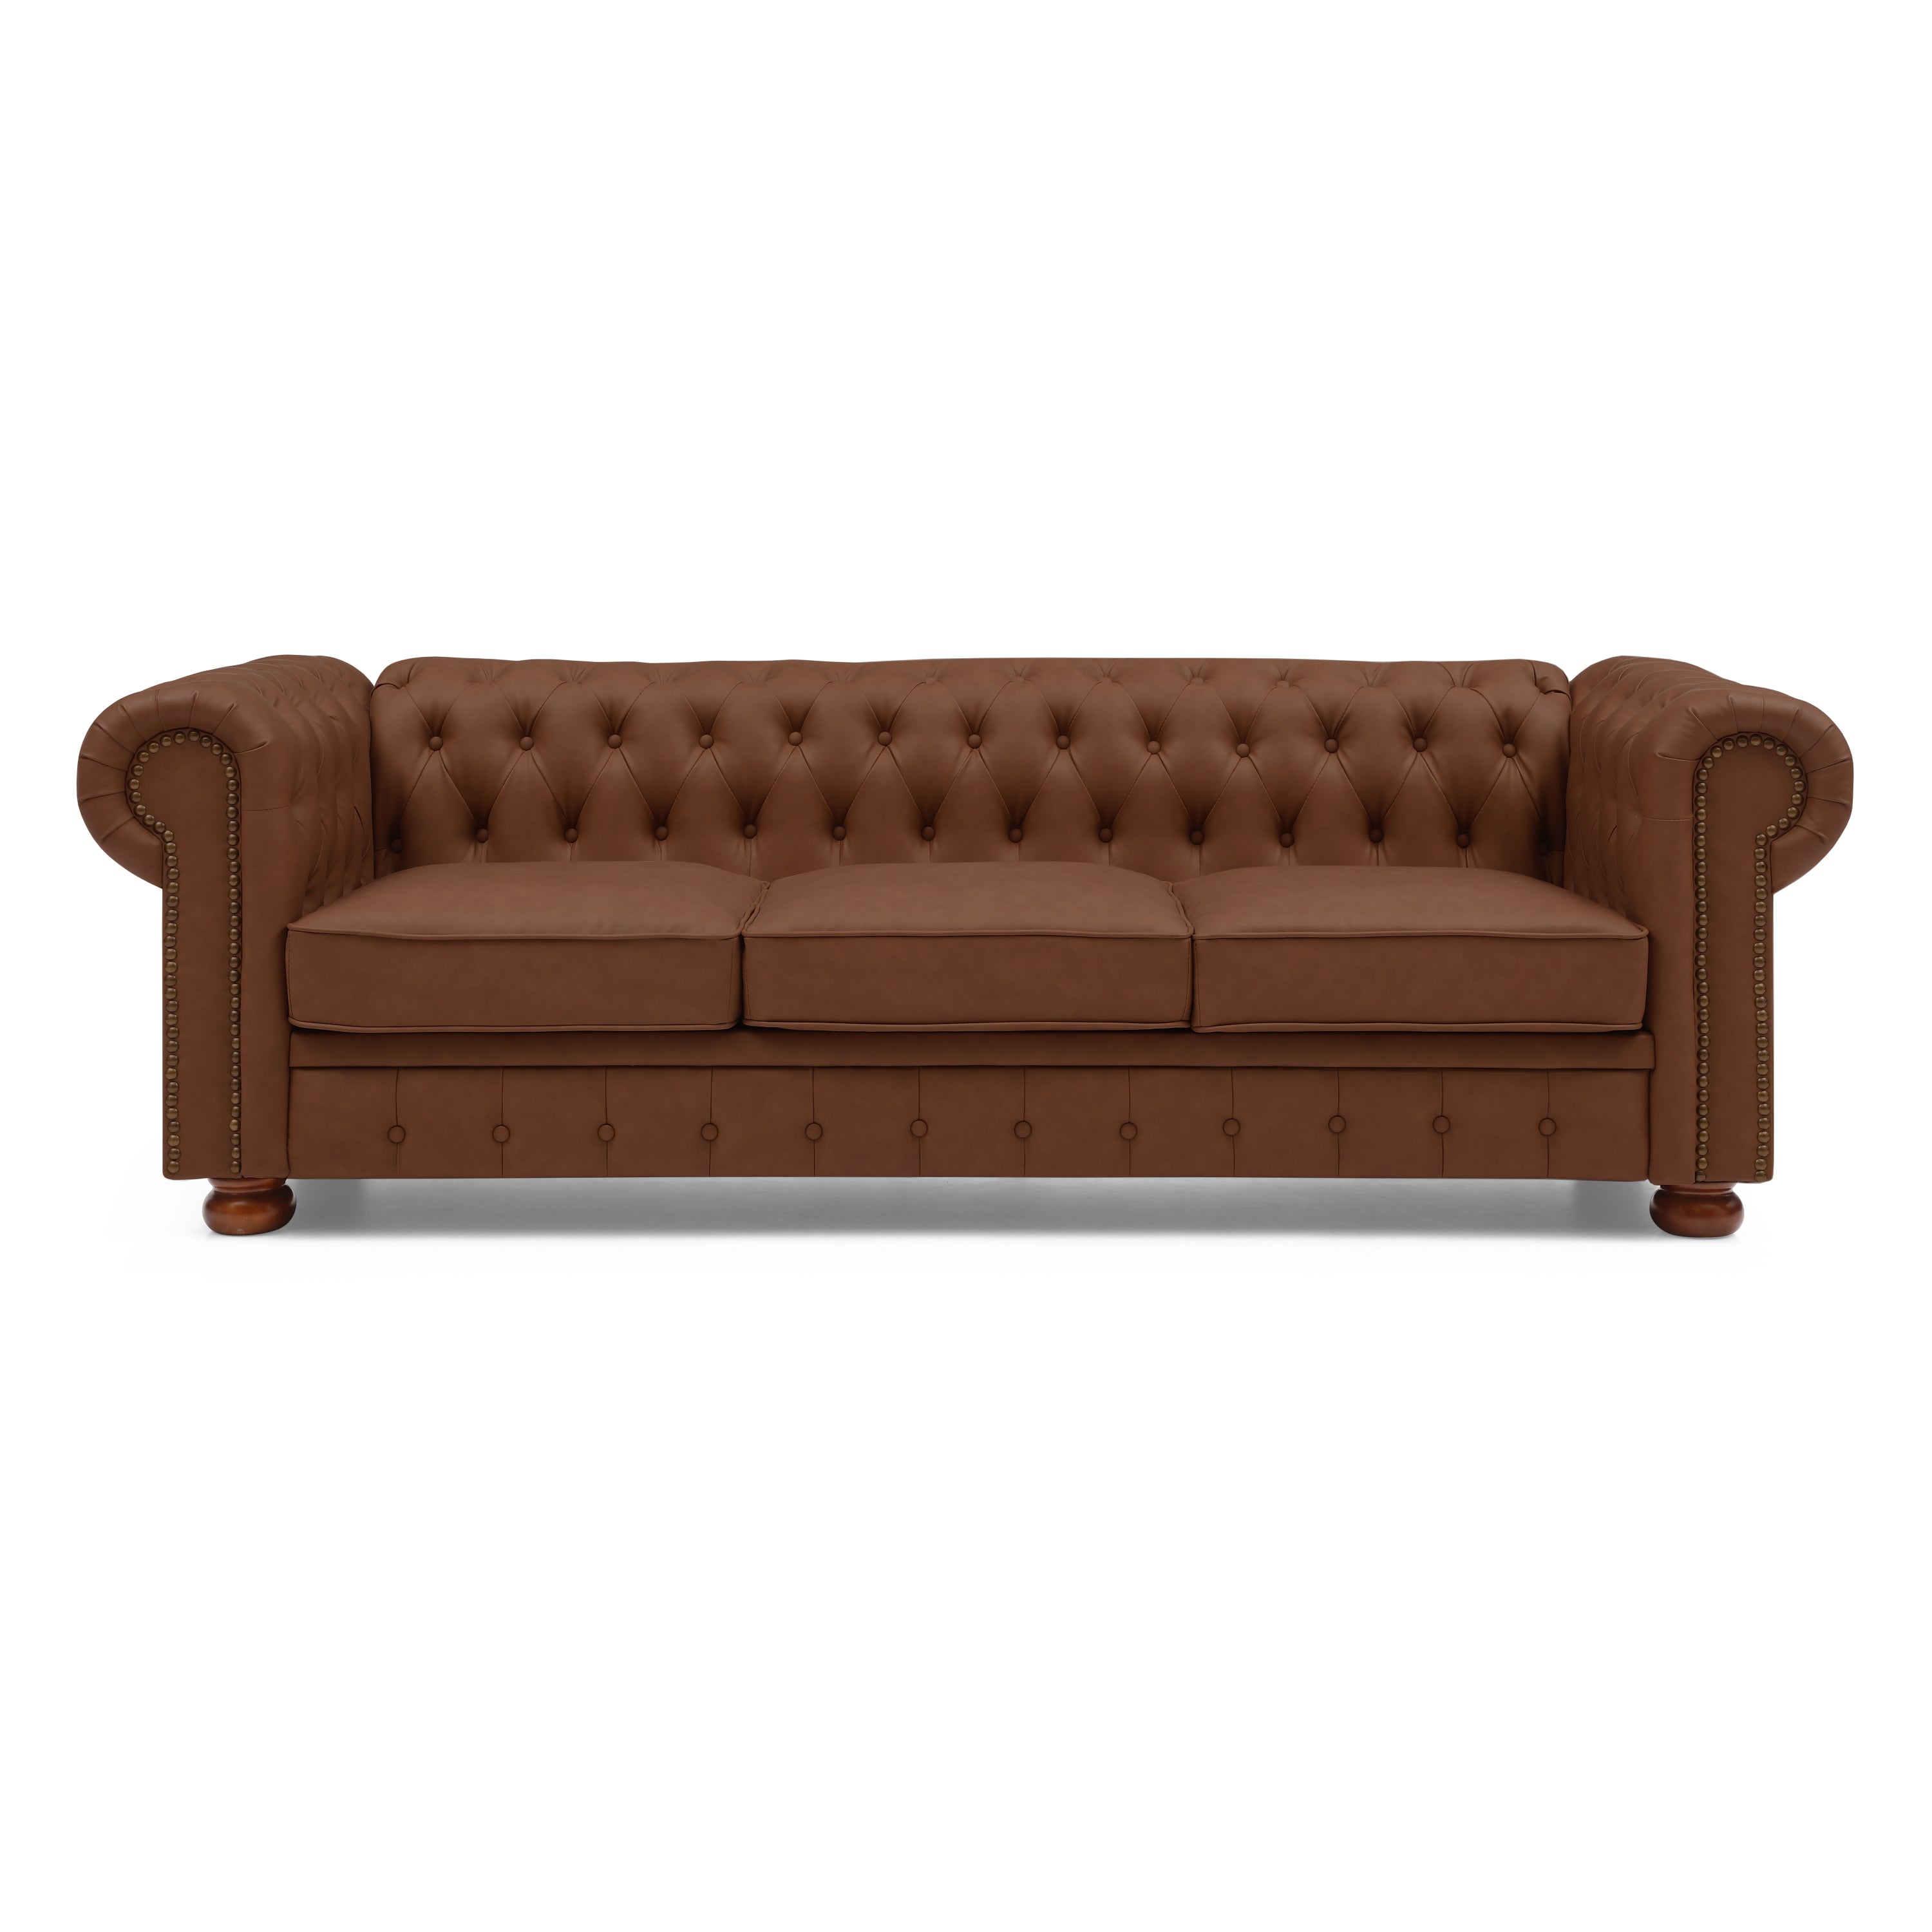 Calvin 88.5" Brown Faux Leather Chesterfield Sofa